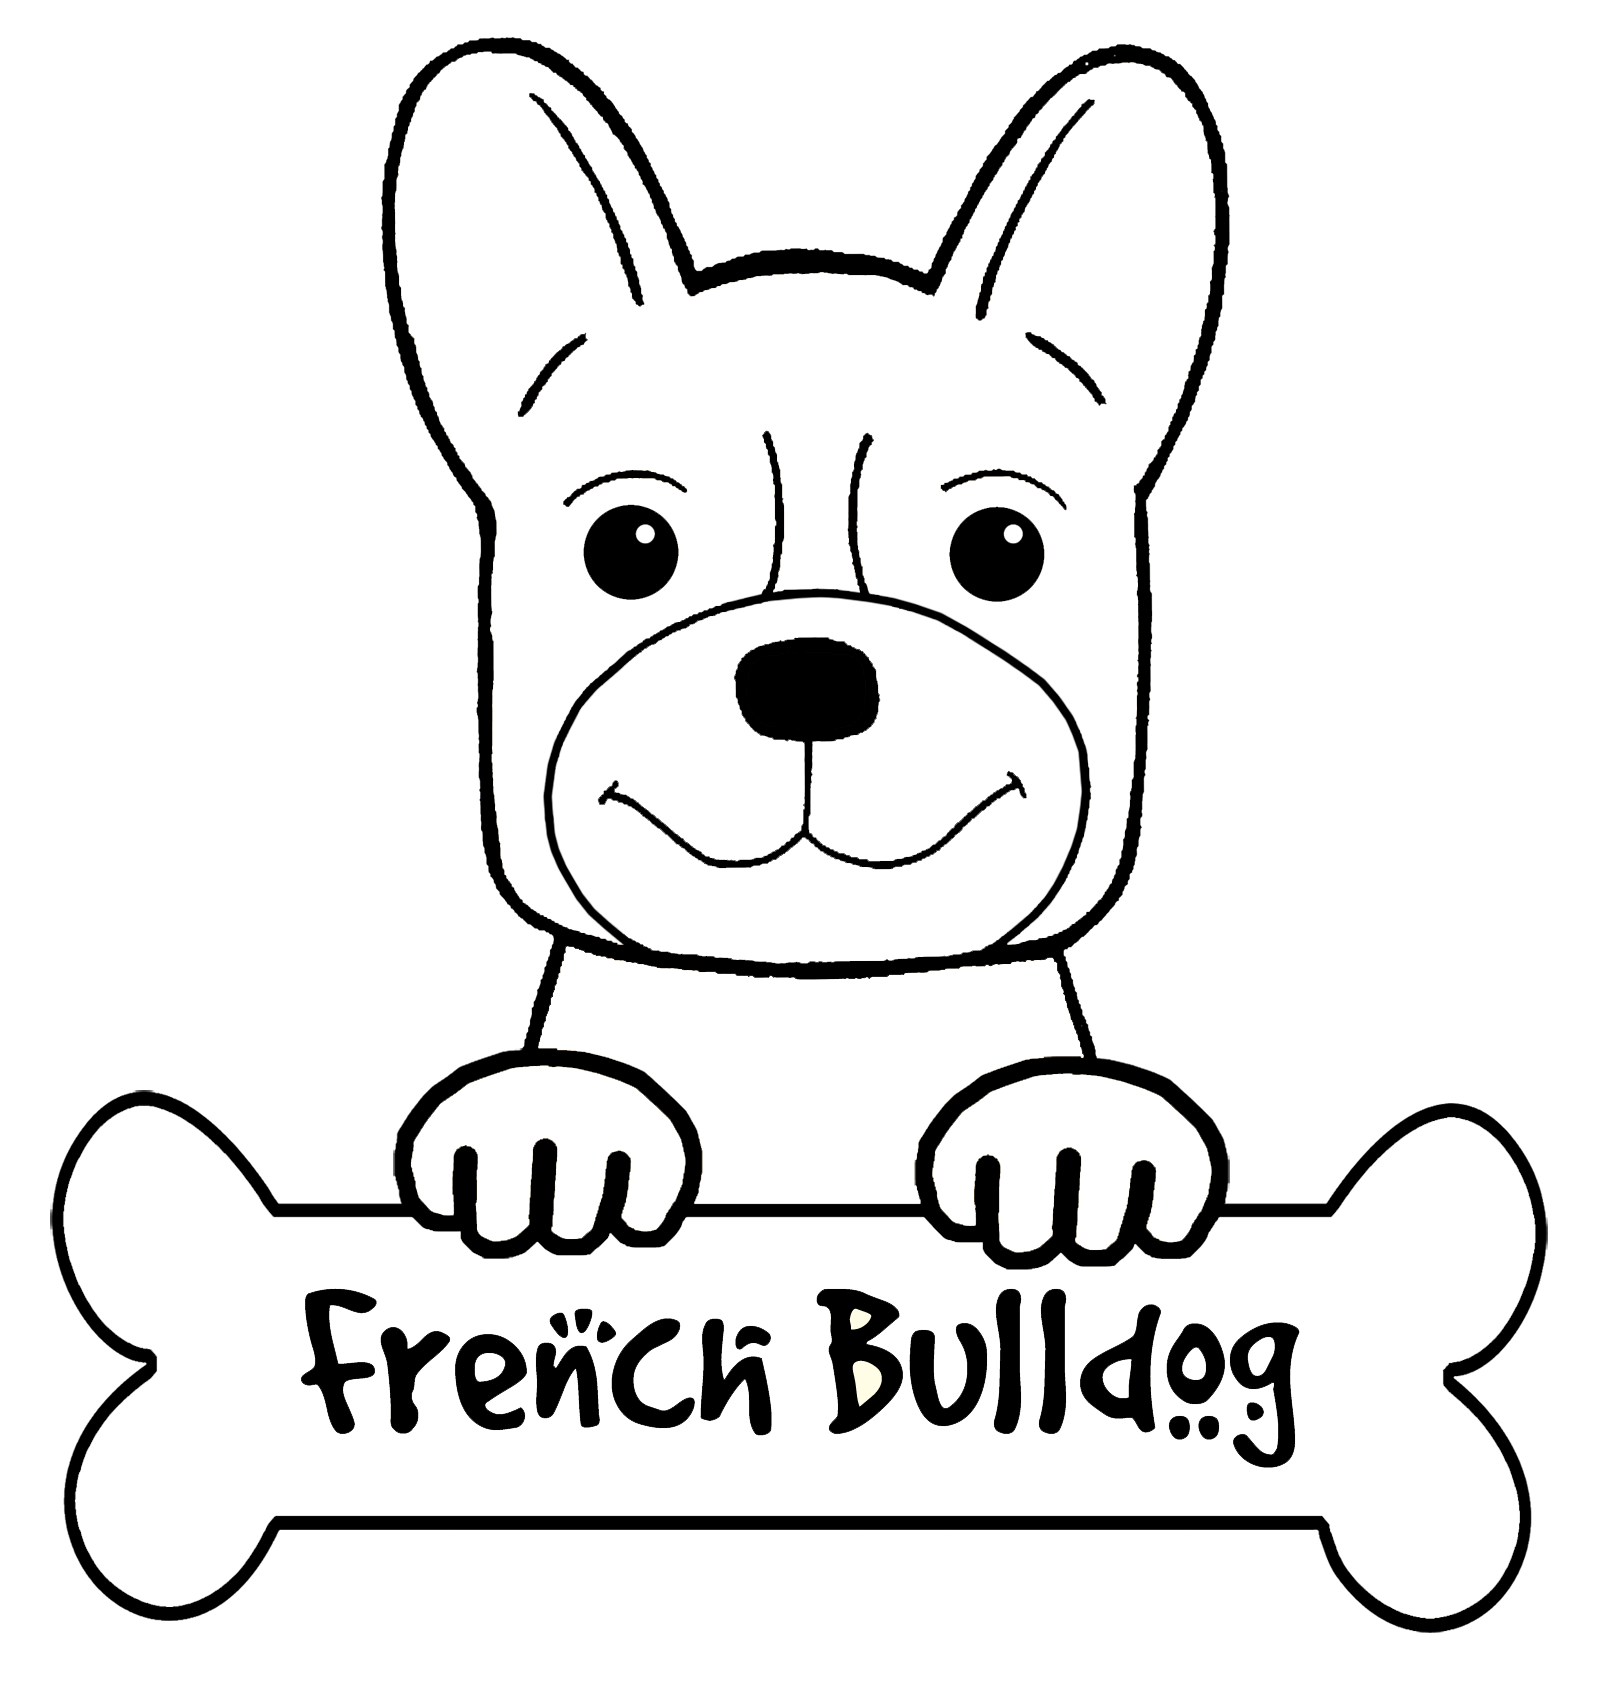 A French Bulldog Coloring Page